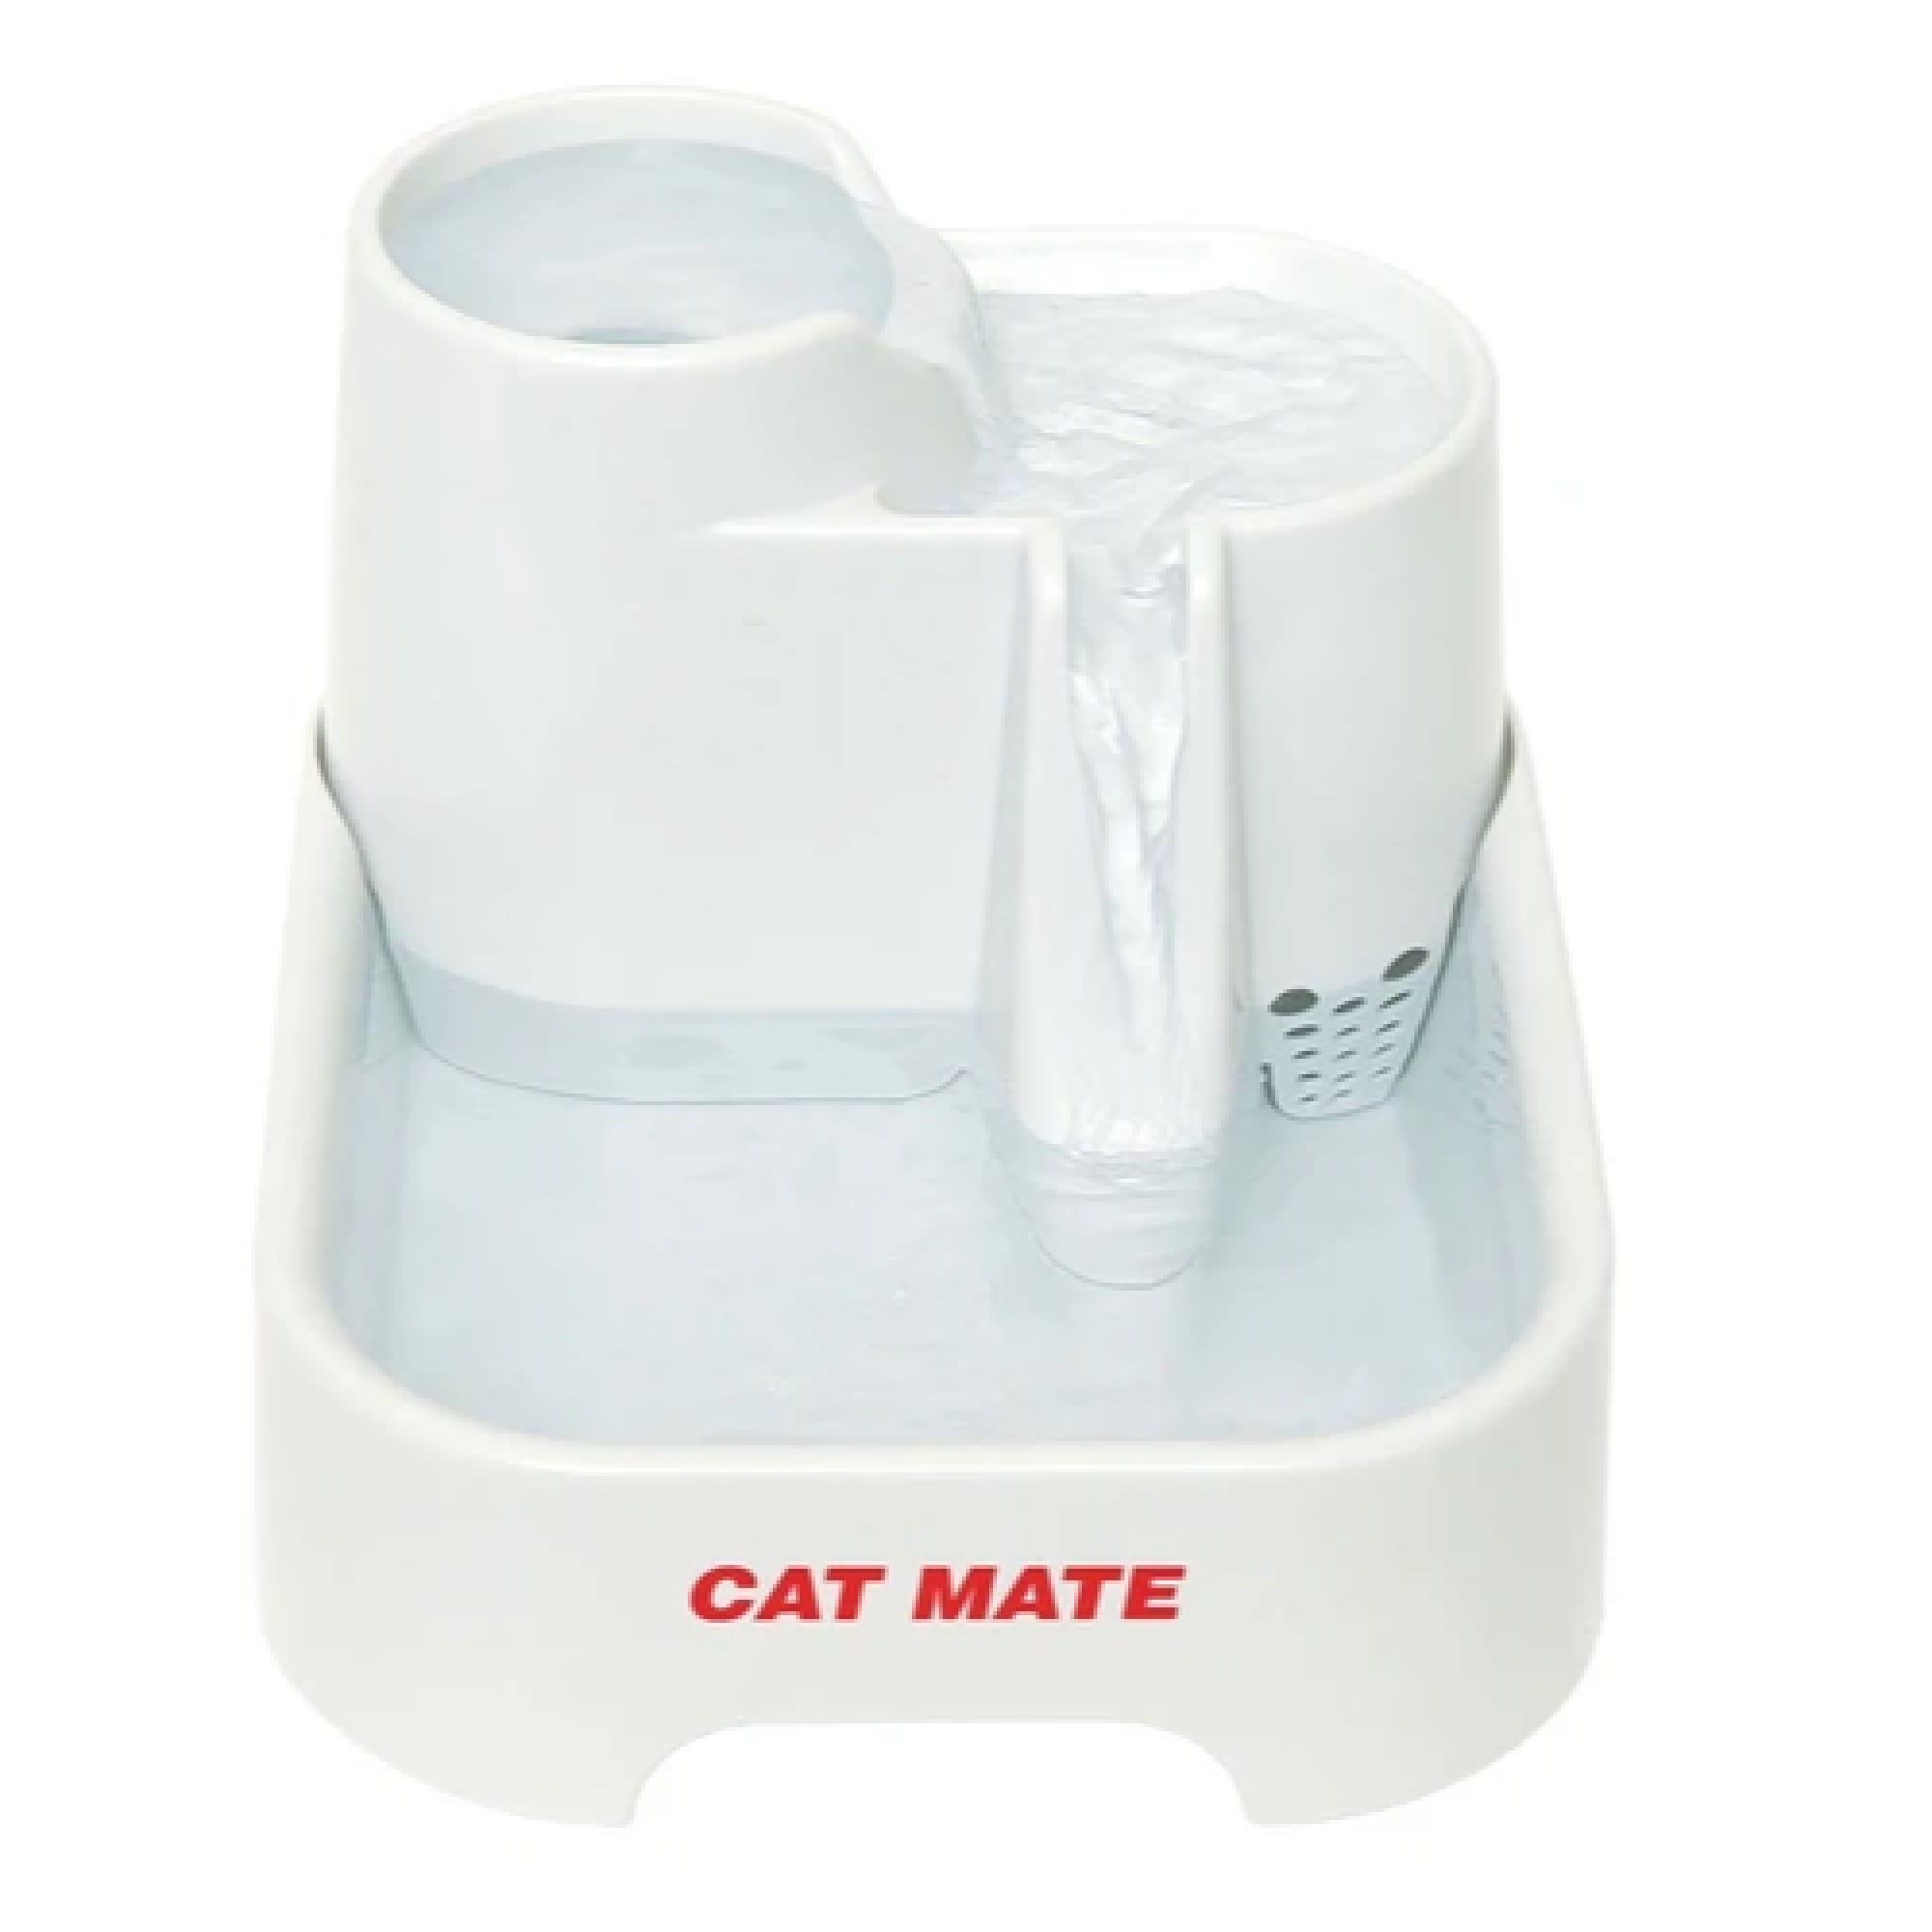  Cat Mate 3-Level, 70 fl. oz. Pet Fountain - BPA and BHT Free  with 3-Stage Filter and Low Voltage Pump : Pet Self Waterers : Pet Supplies